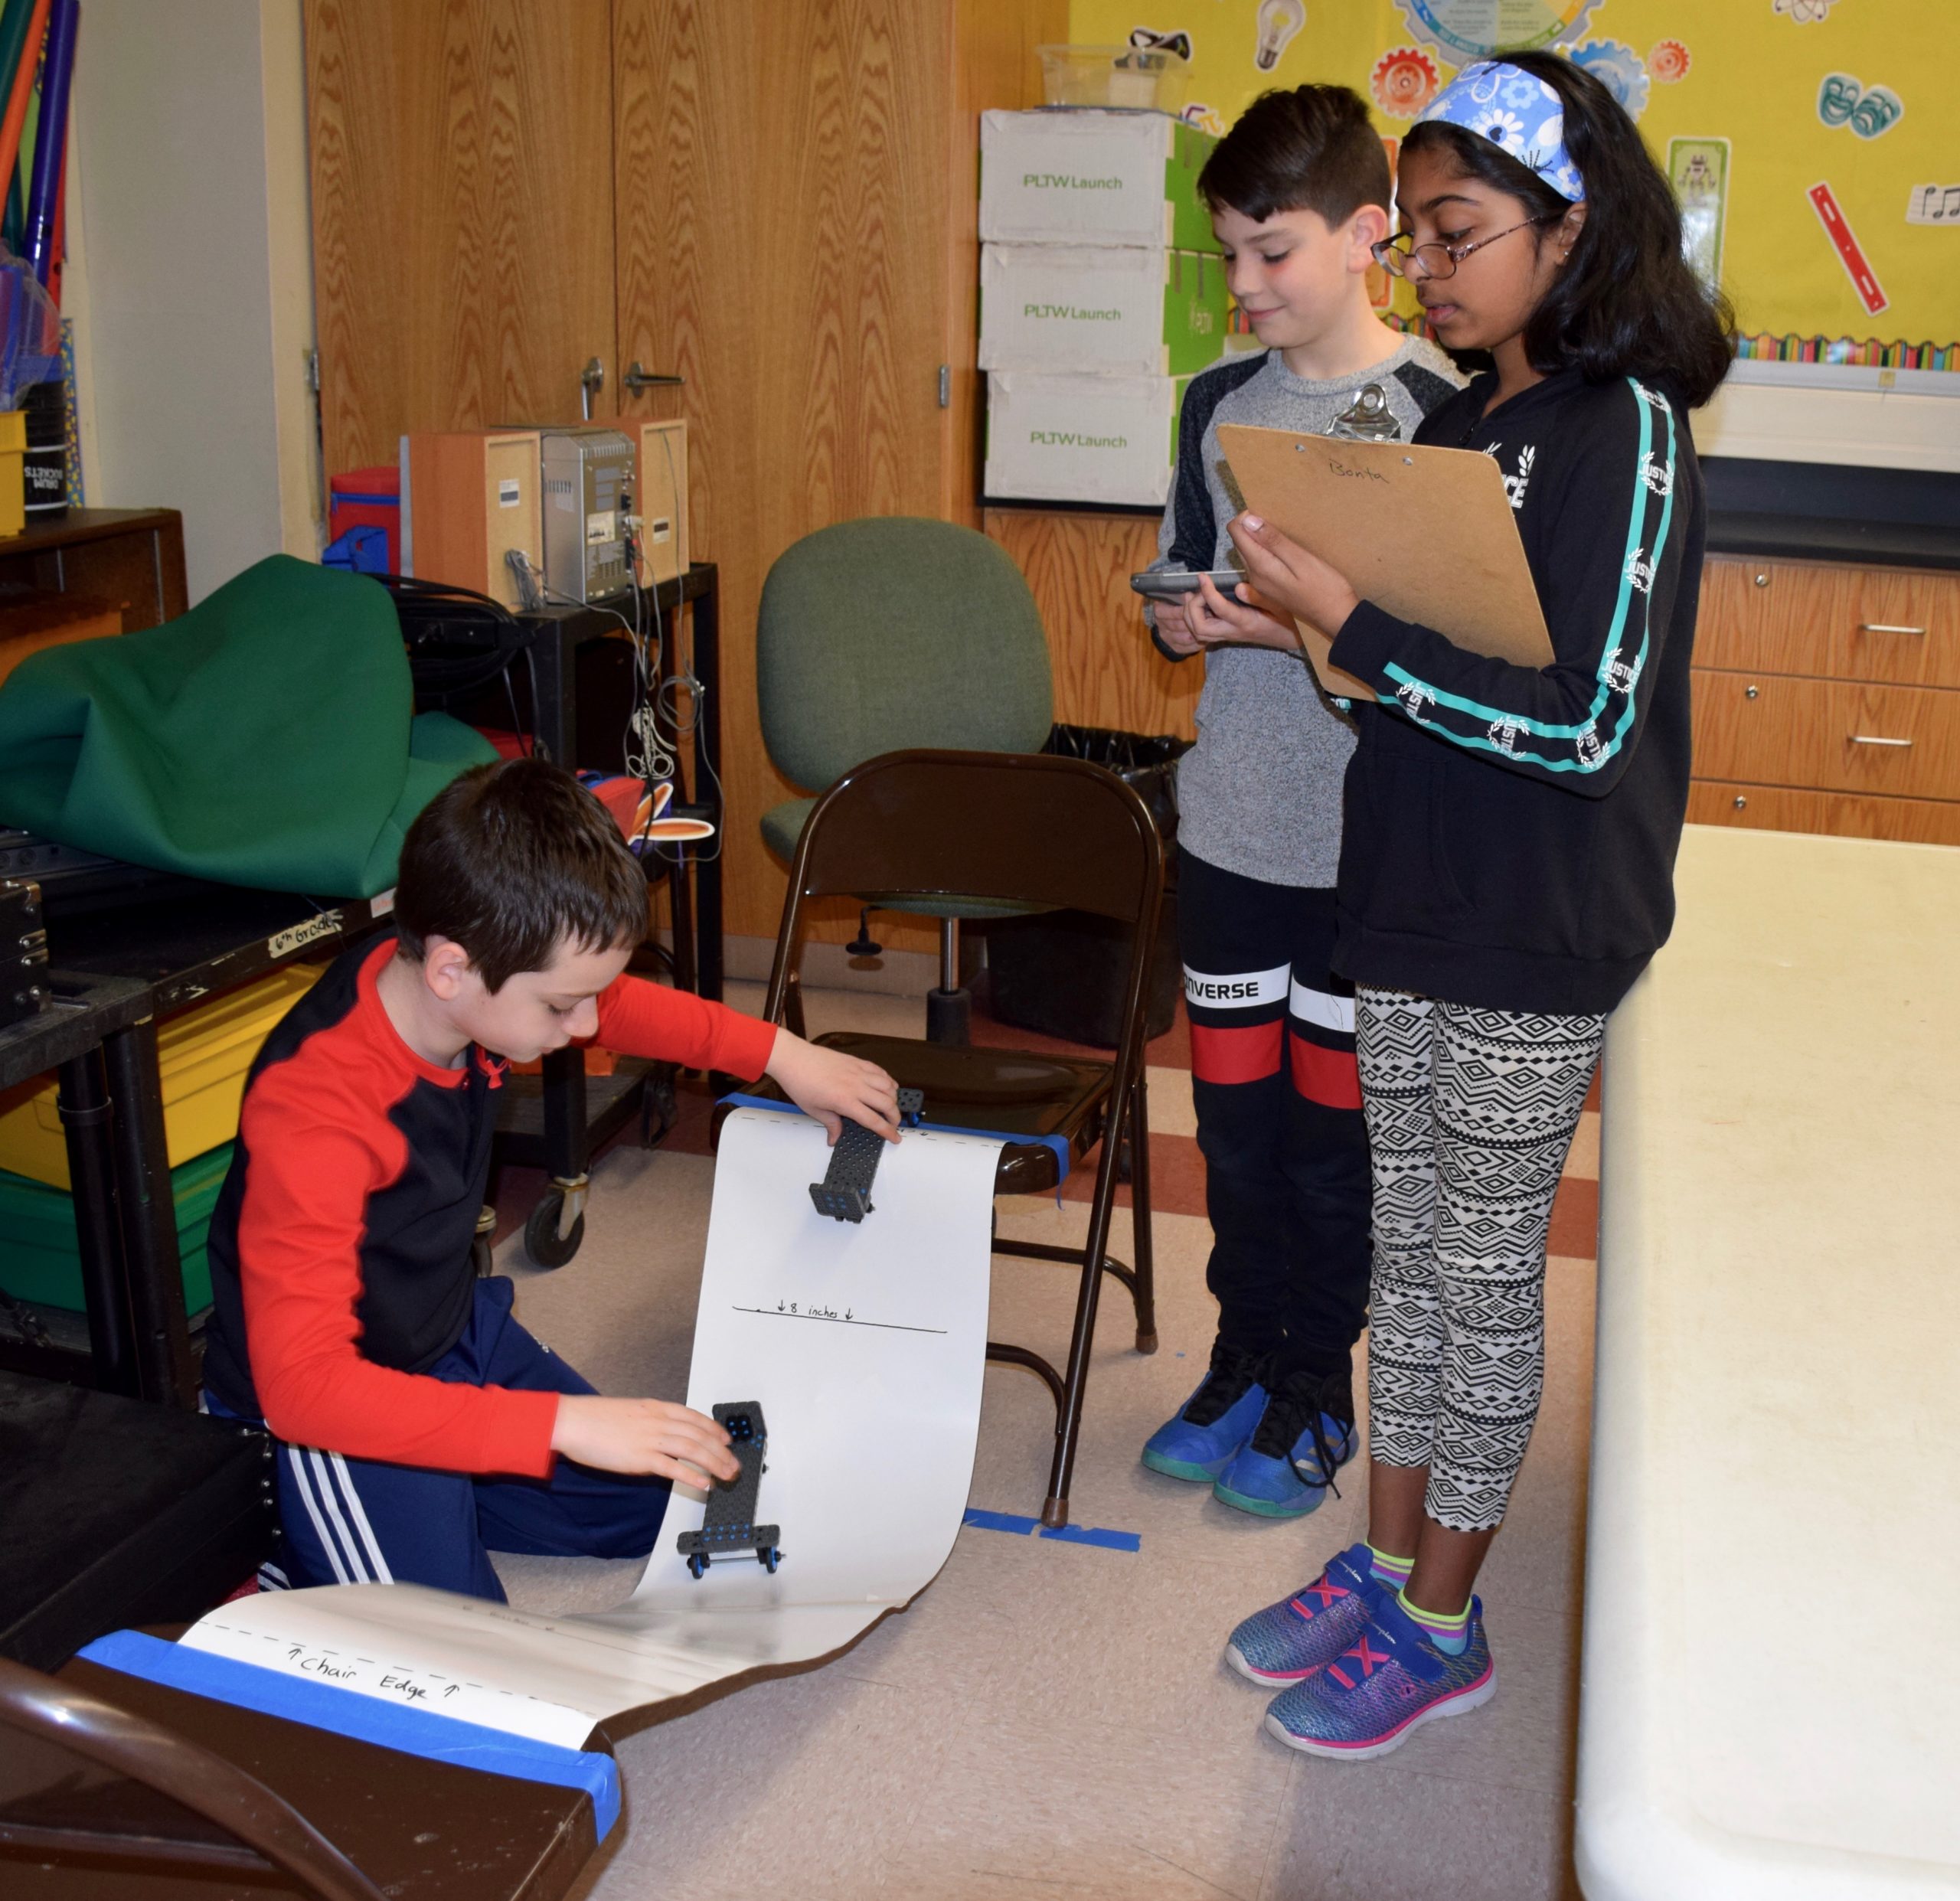 Manor Oaks School students Mateo Mrakovcic (left), Alexander Fulgieri and Meera Lal (right) teamed up to test collisions during an Energy and Collision module. (Photo courtesy of the New Hyde Park-Garden City school district)